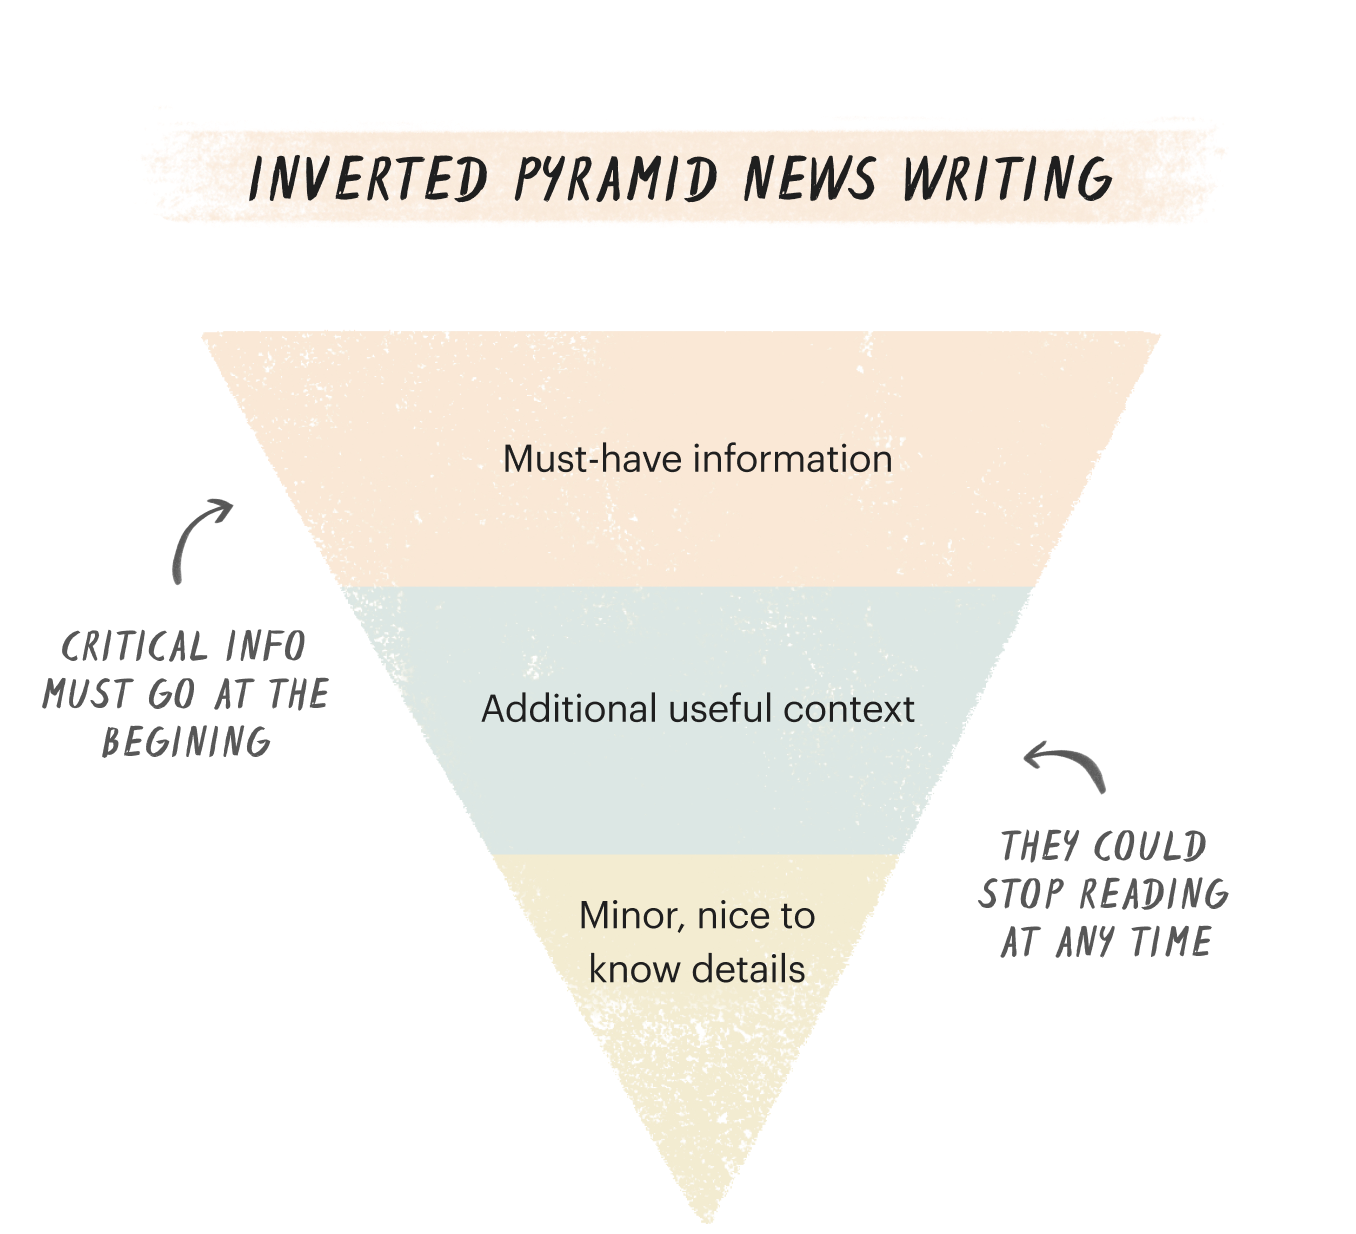 The figure is titled: Inverted Pyramid News Writing. The top level is the widest, and is labeled Must-Have information. The middle level is labeled Additional useful context. The smallest level at the bottom point of the pyramid is labeled Minor, nice to know details. Two additional notes read: "Critical info must go at the beginning" and "They could stop reading at any time."